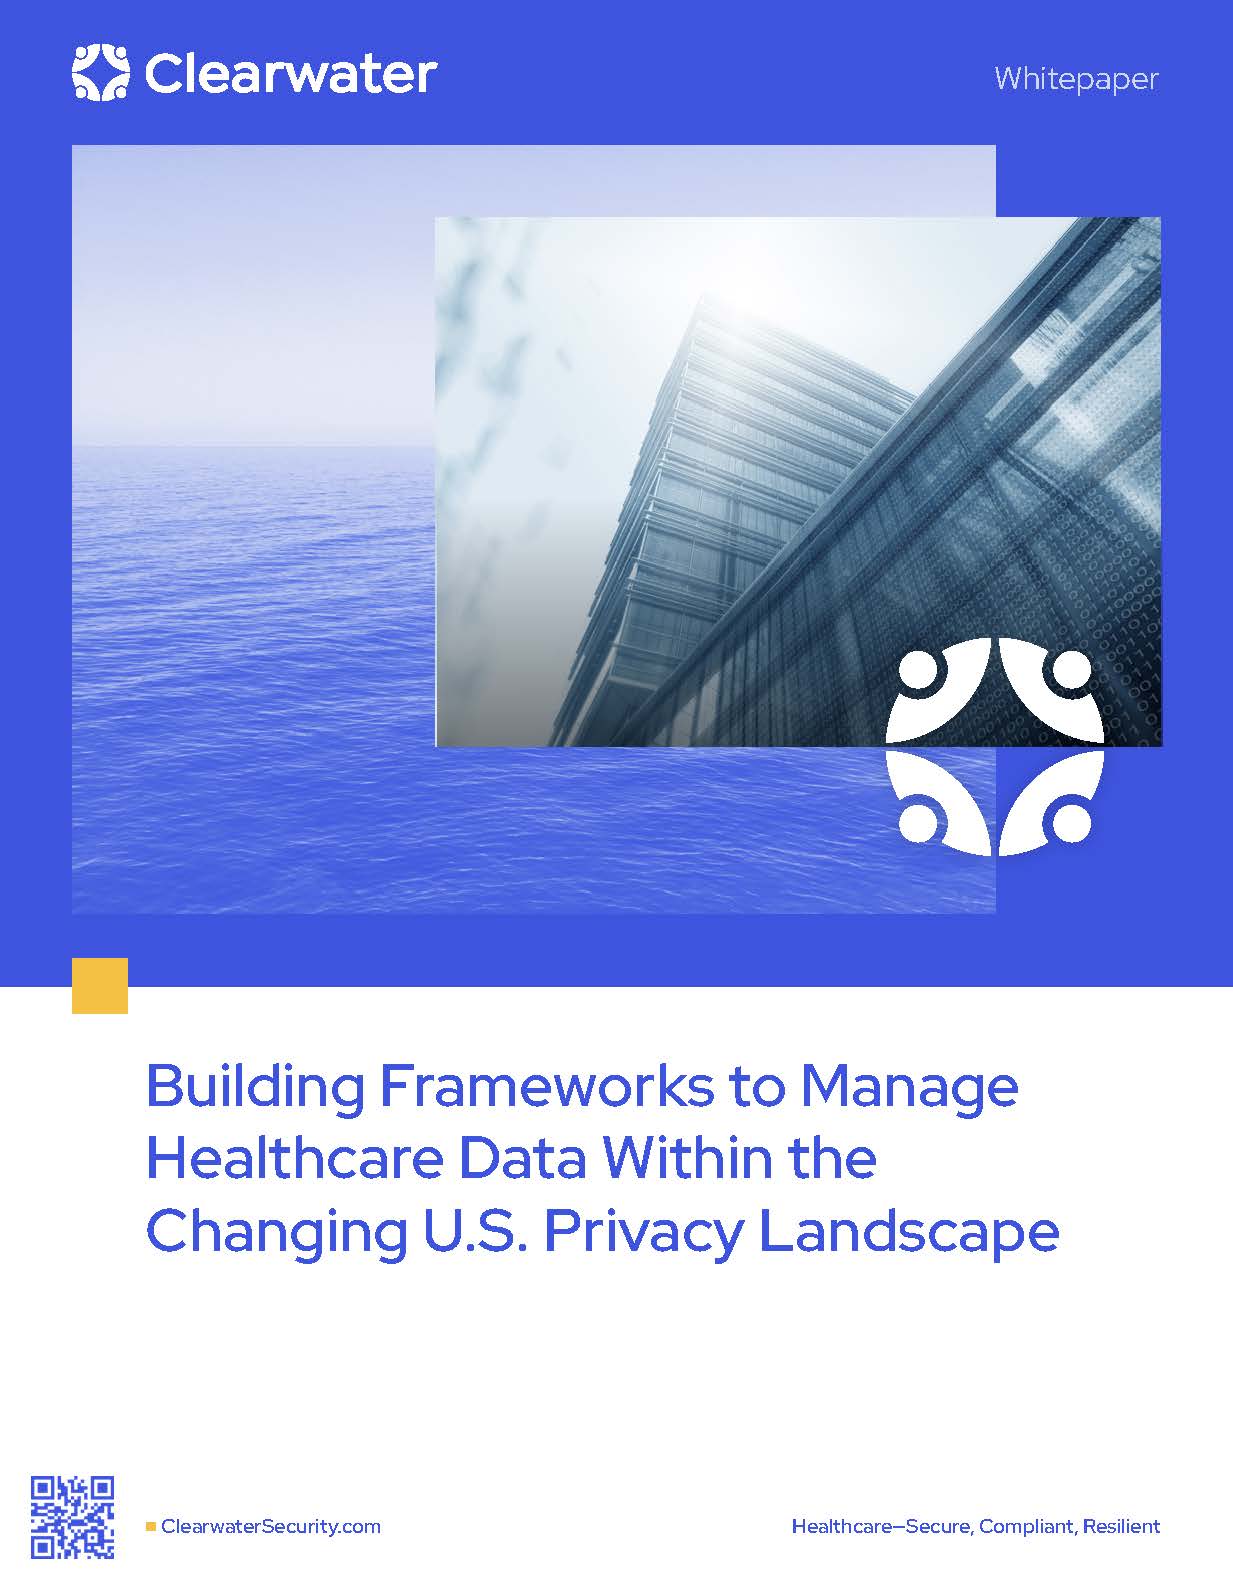 Building Frameworks to Manage Healthcare Data Within the Changing US Privacy Landscape by Clearwater